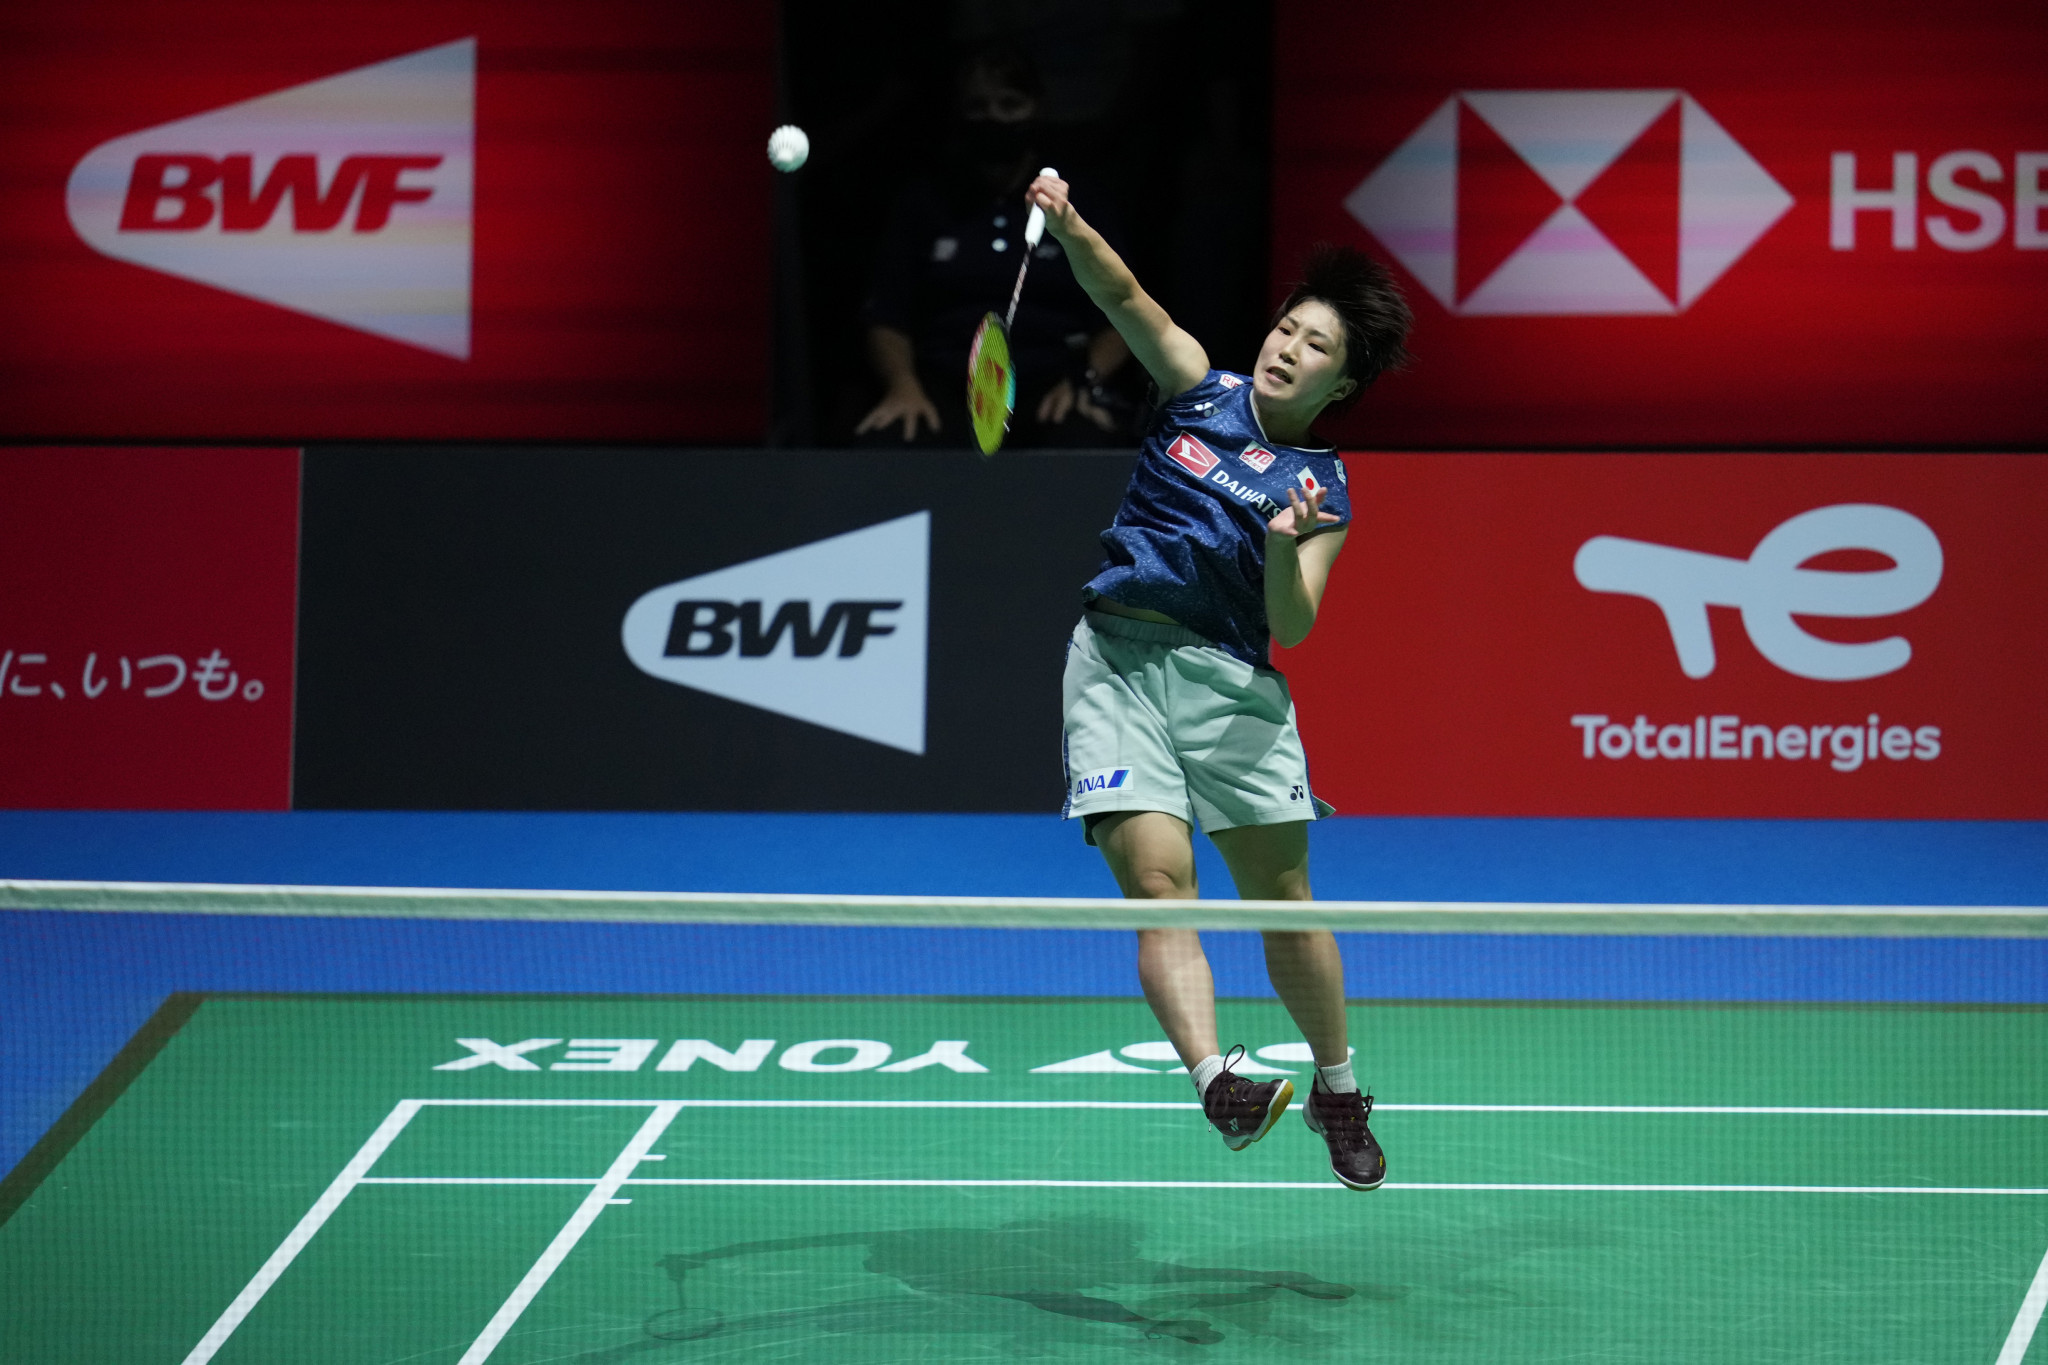 Women's singles top seed Akane Yamaguchi has reached the final of the BWF Malaysian Open ©Getty Images 